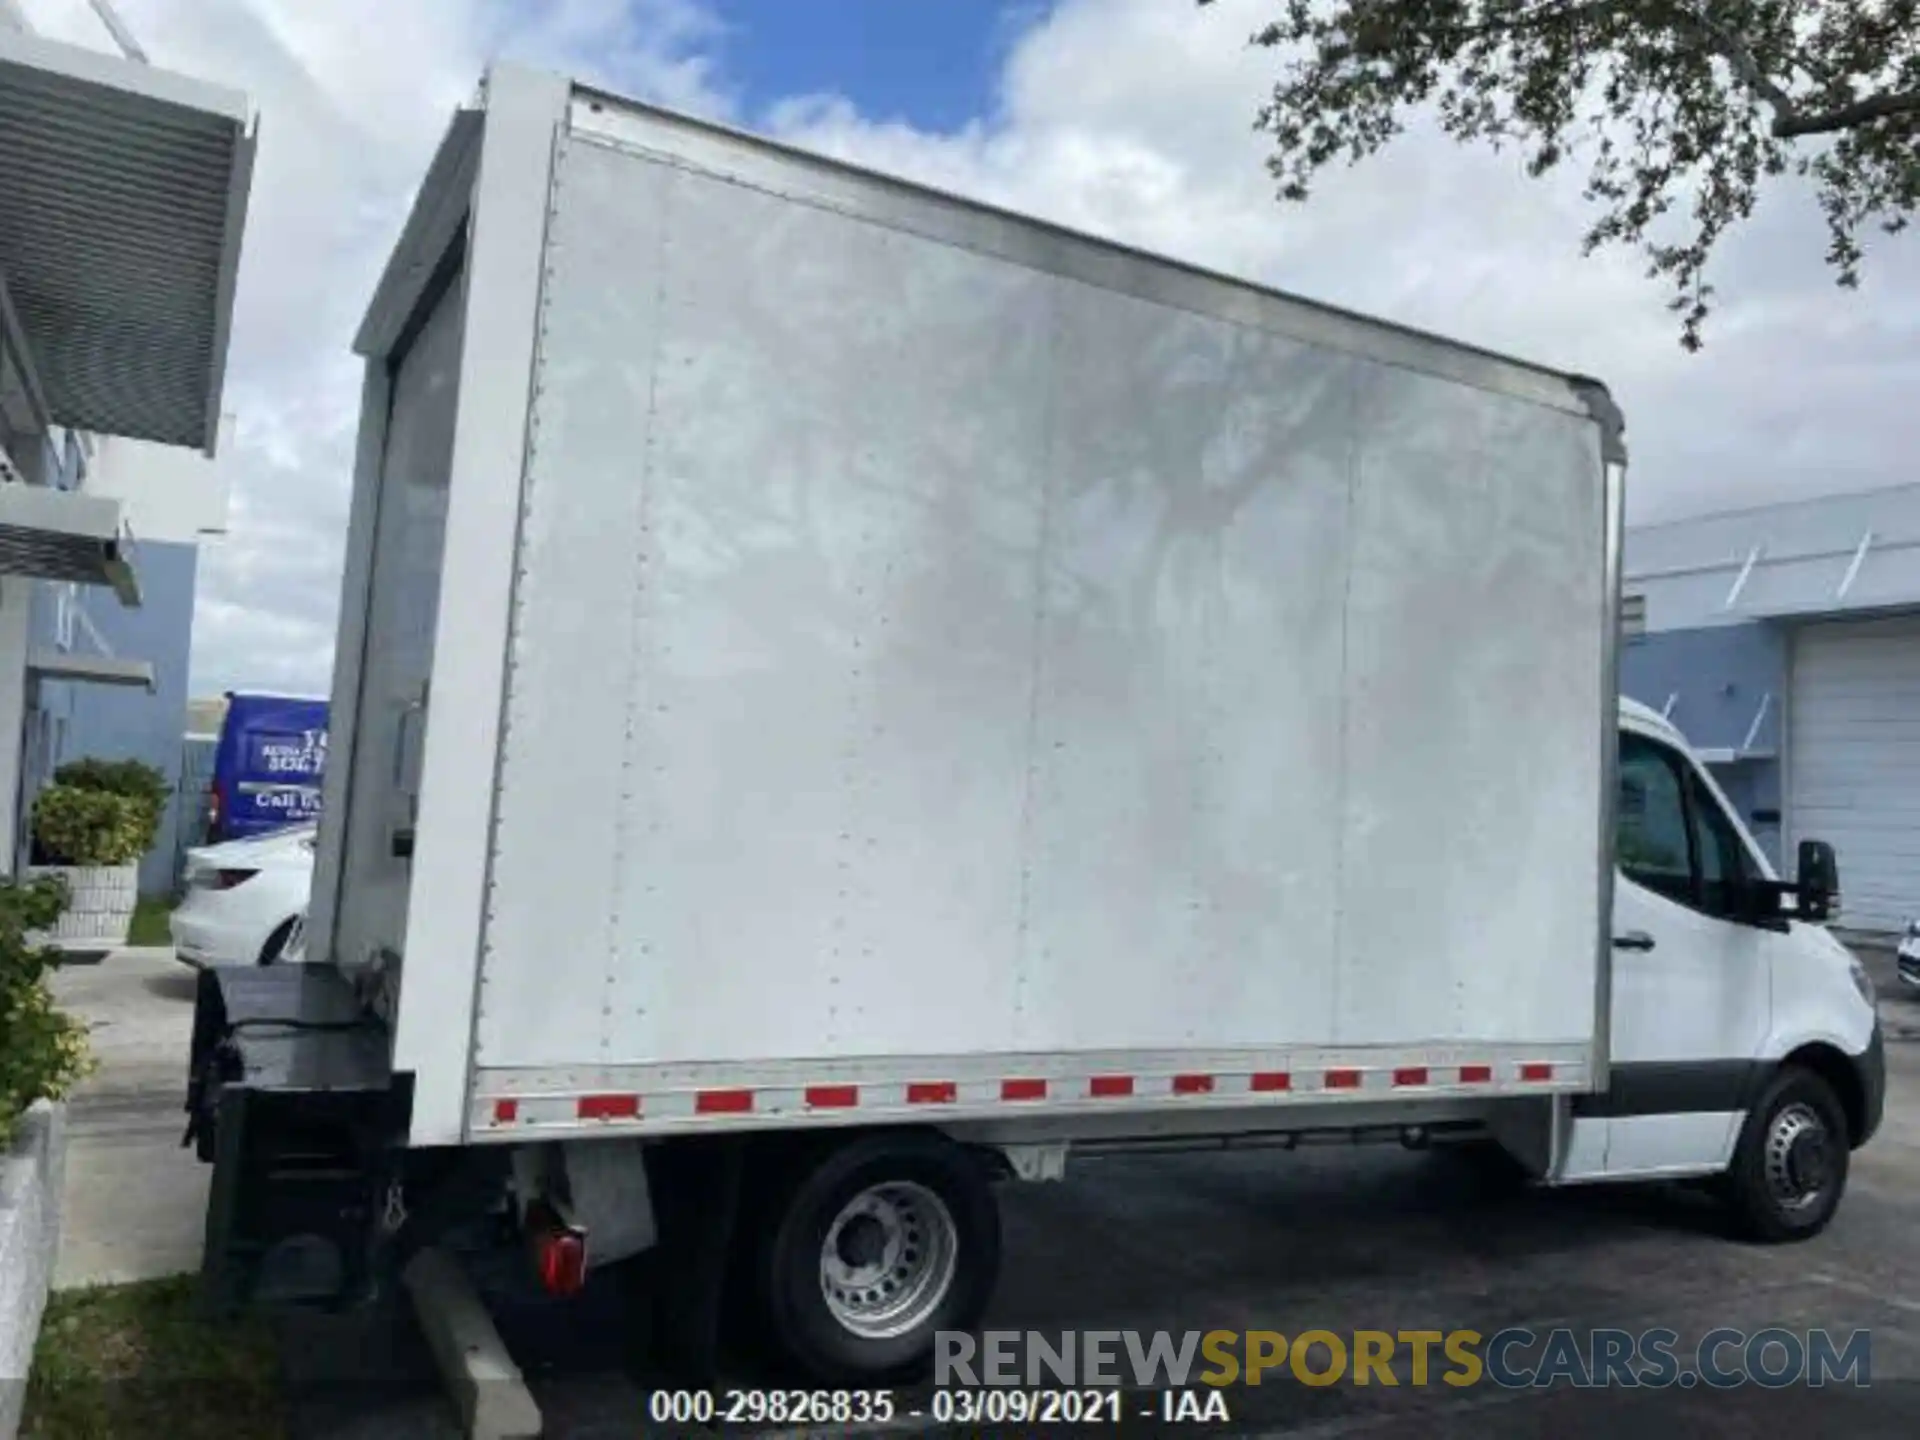 4 Photograph of a damaged car WDAPF4CD6KN015095 MERCEDES-BENZ SPRINTER CAB CHASSIS 2019